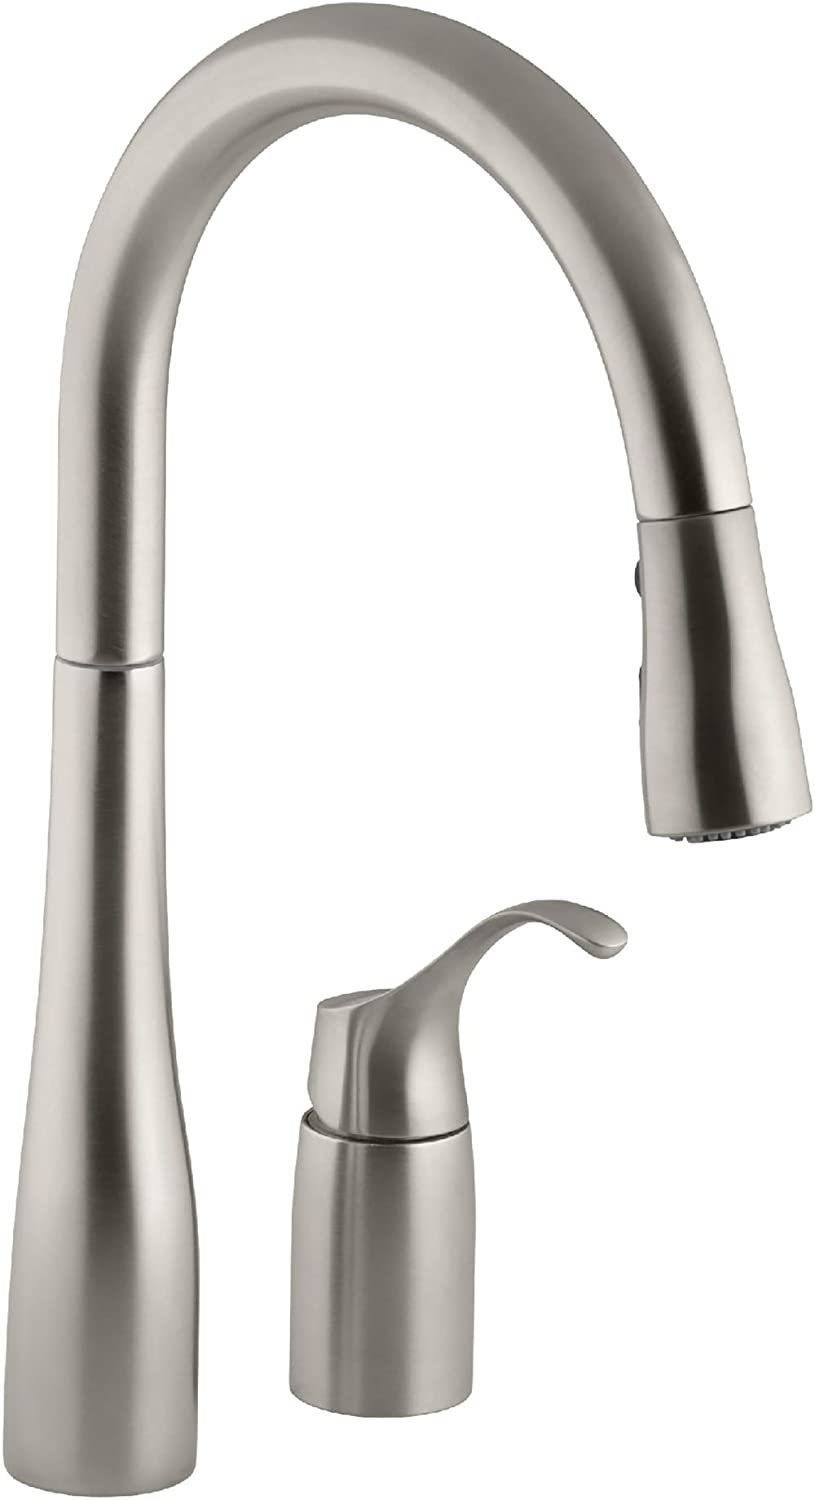 Simplice®two-hole kitchen sink faucet with 16-1/8